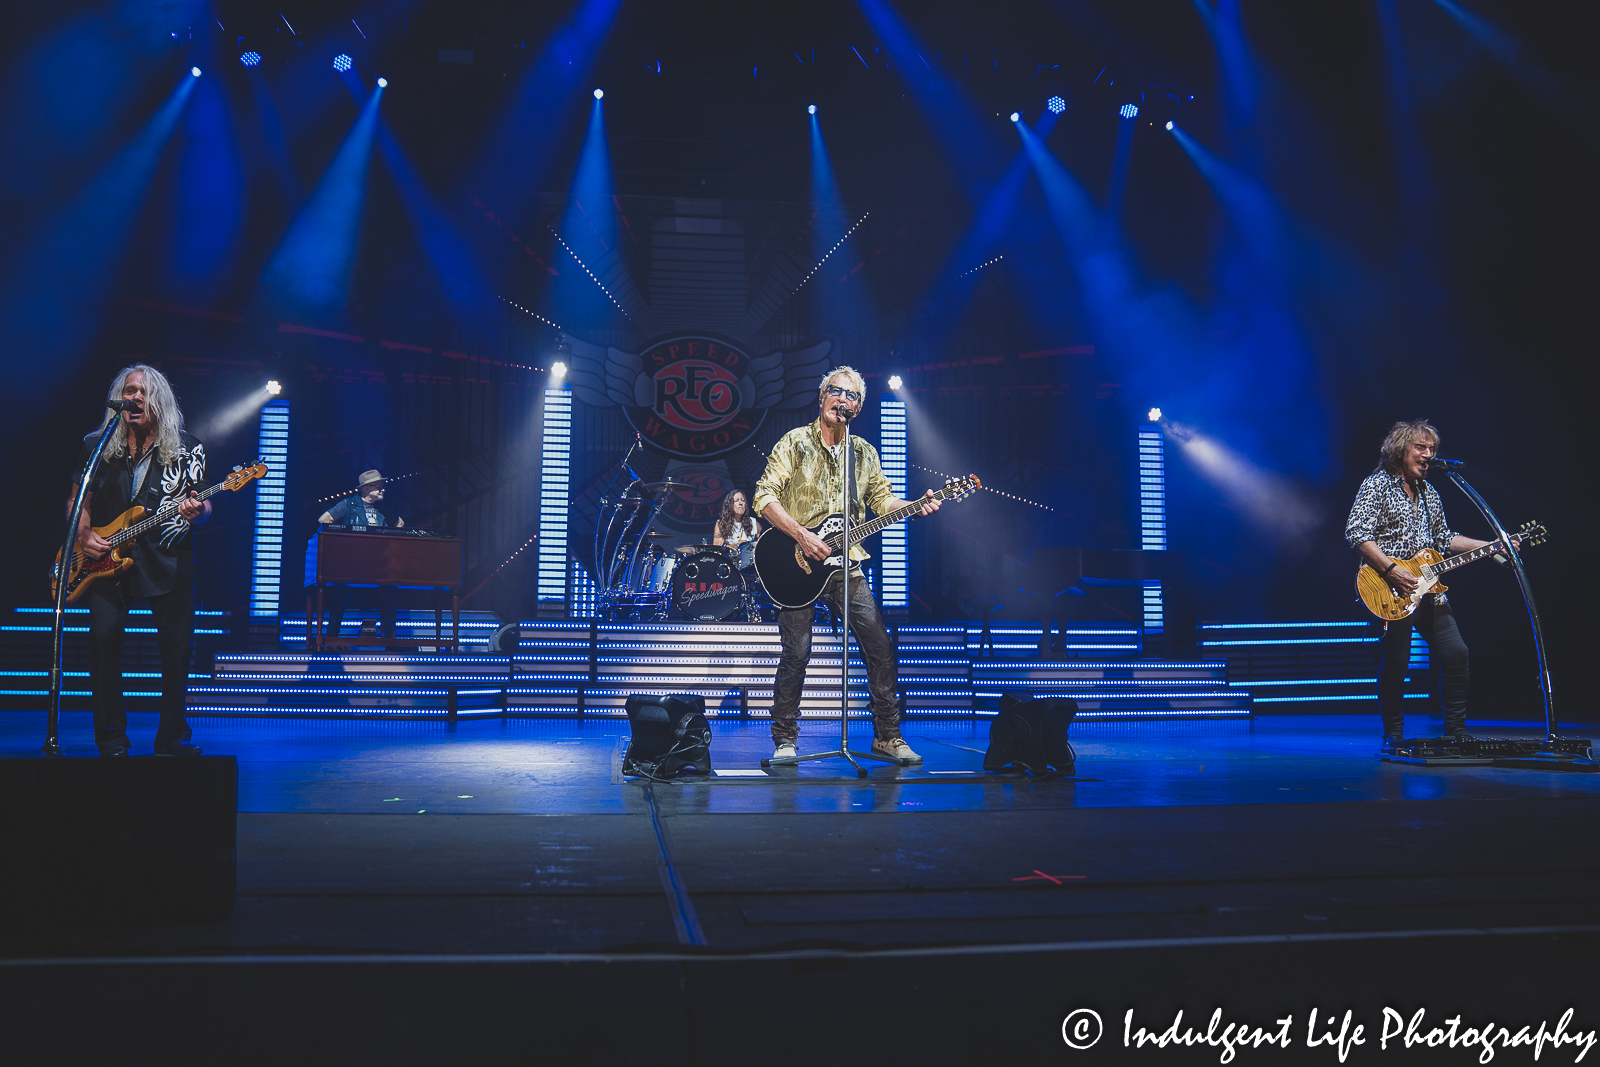 Rock band REO Speedwagon in concert on "Live & UnZoomed" tour at Starlight Theatre in Kansas City, MO on June 14, 2022.